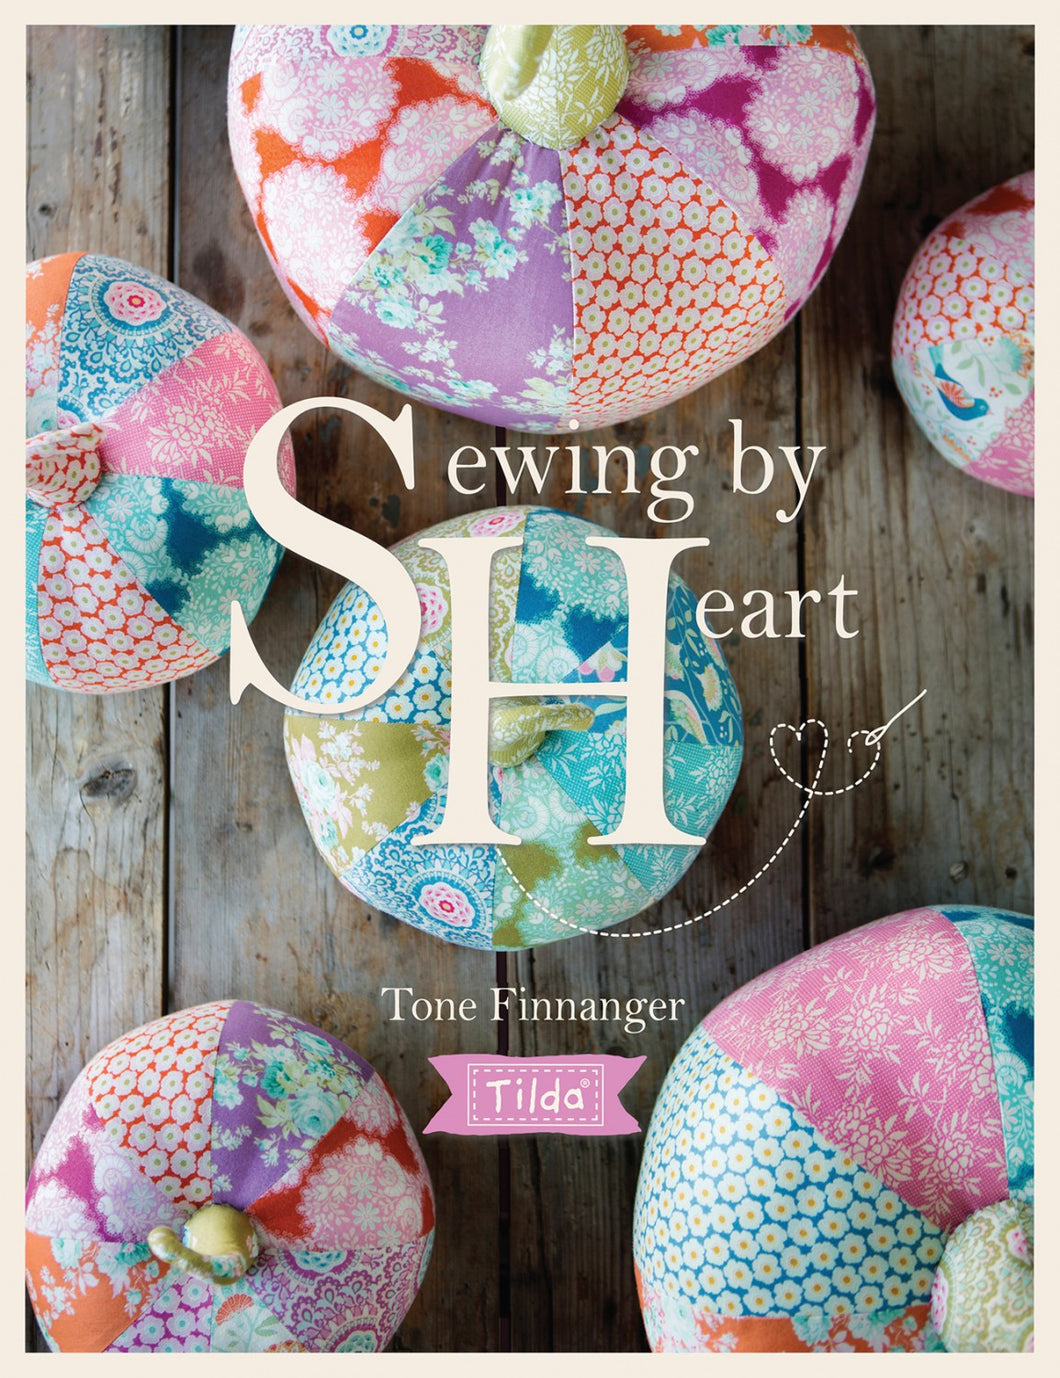 Sewing by Heart book